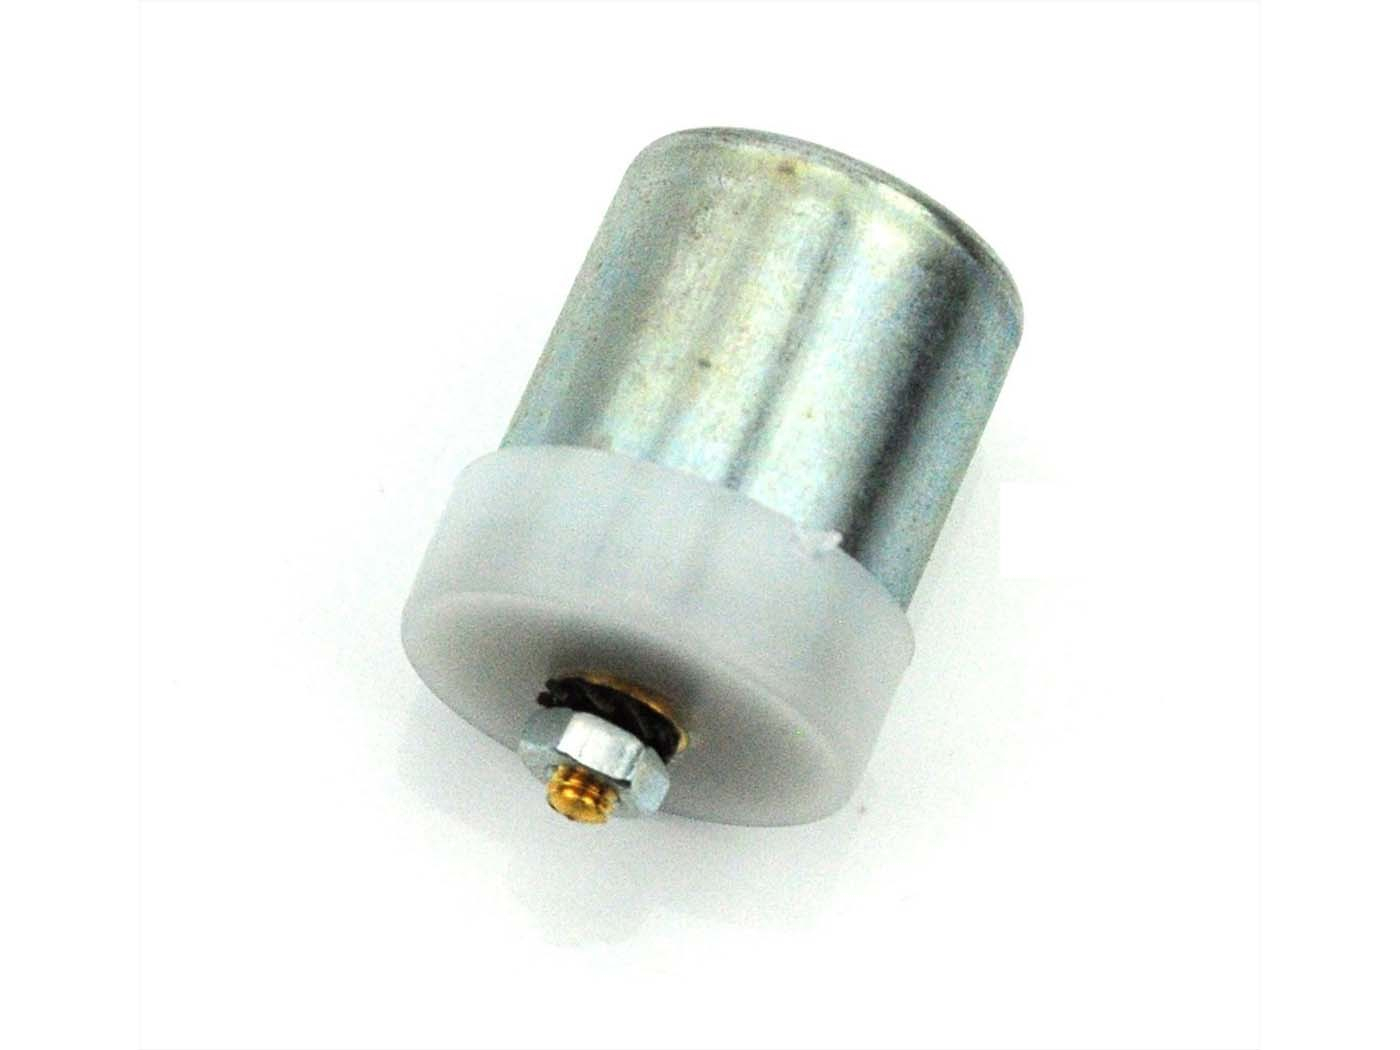 Ignition Capacitor EFFE For Screwing For Mokick Moped Moped